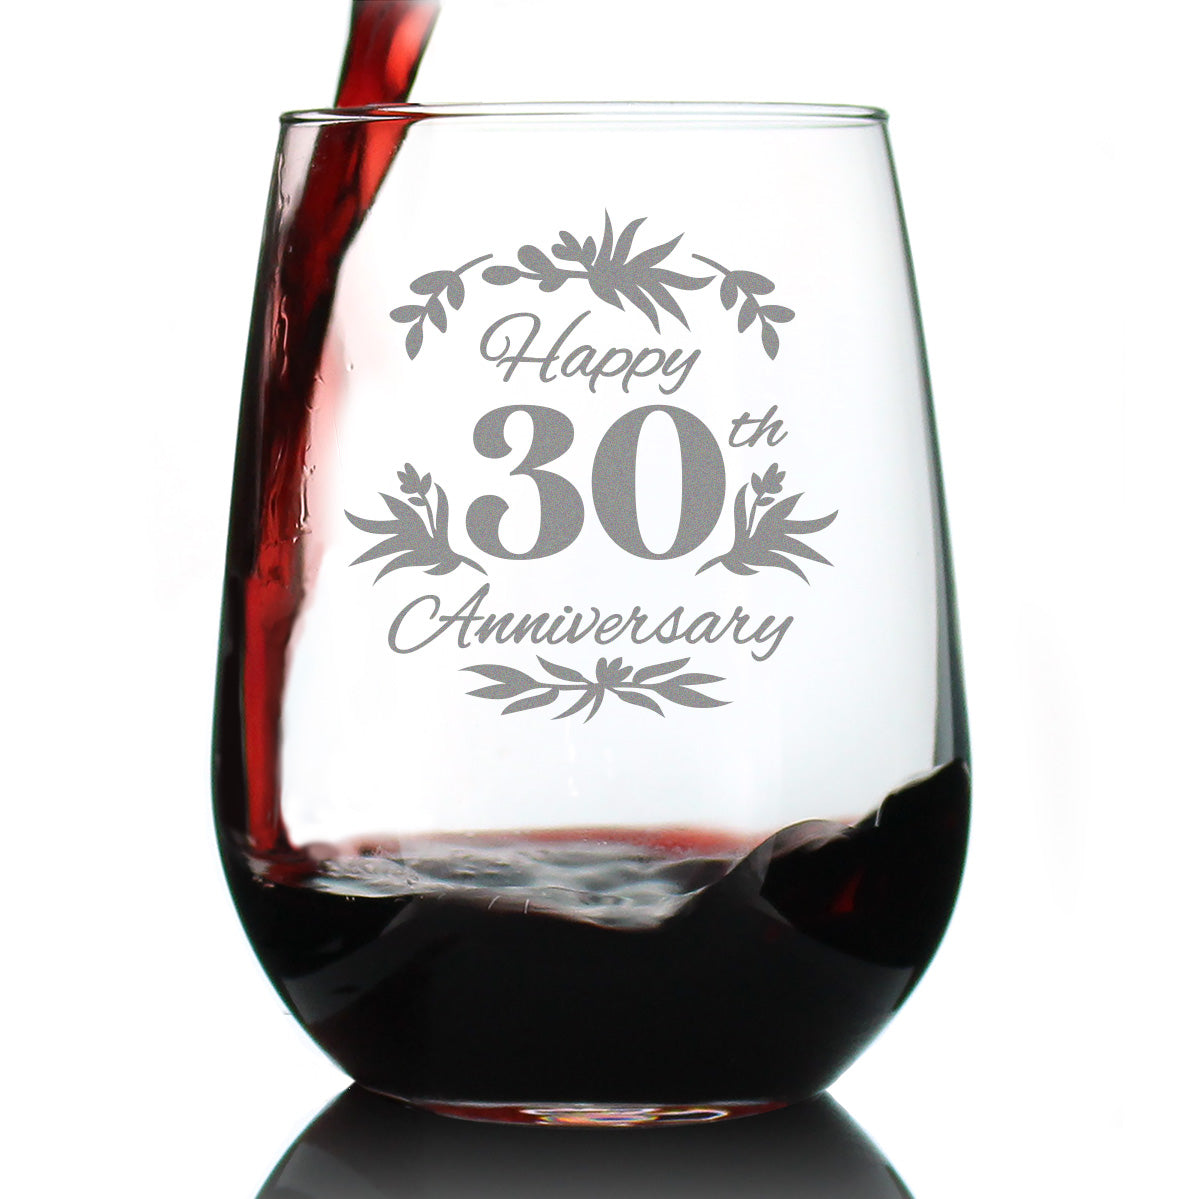 Happy 30th Anniversary - Stemless Wine Glass Gifts for Women & Men - 30 Year Anniversary Party Decor - Large Glasses